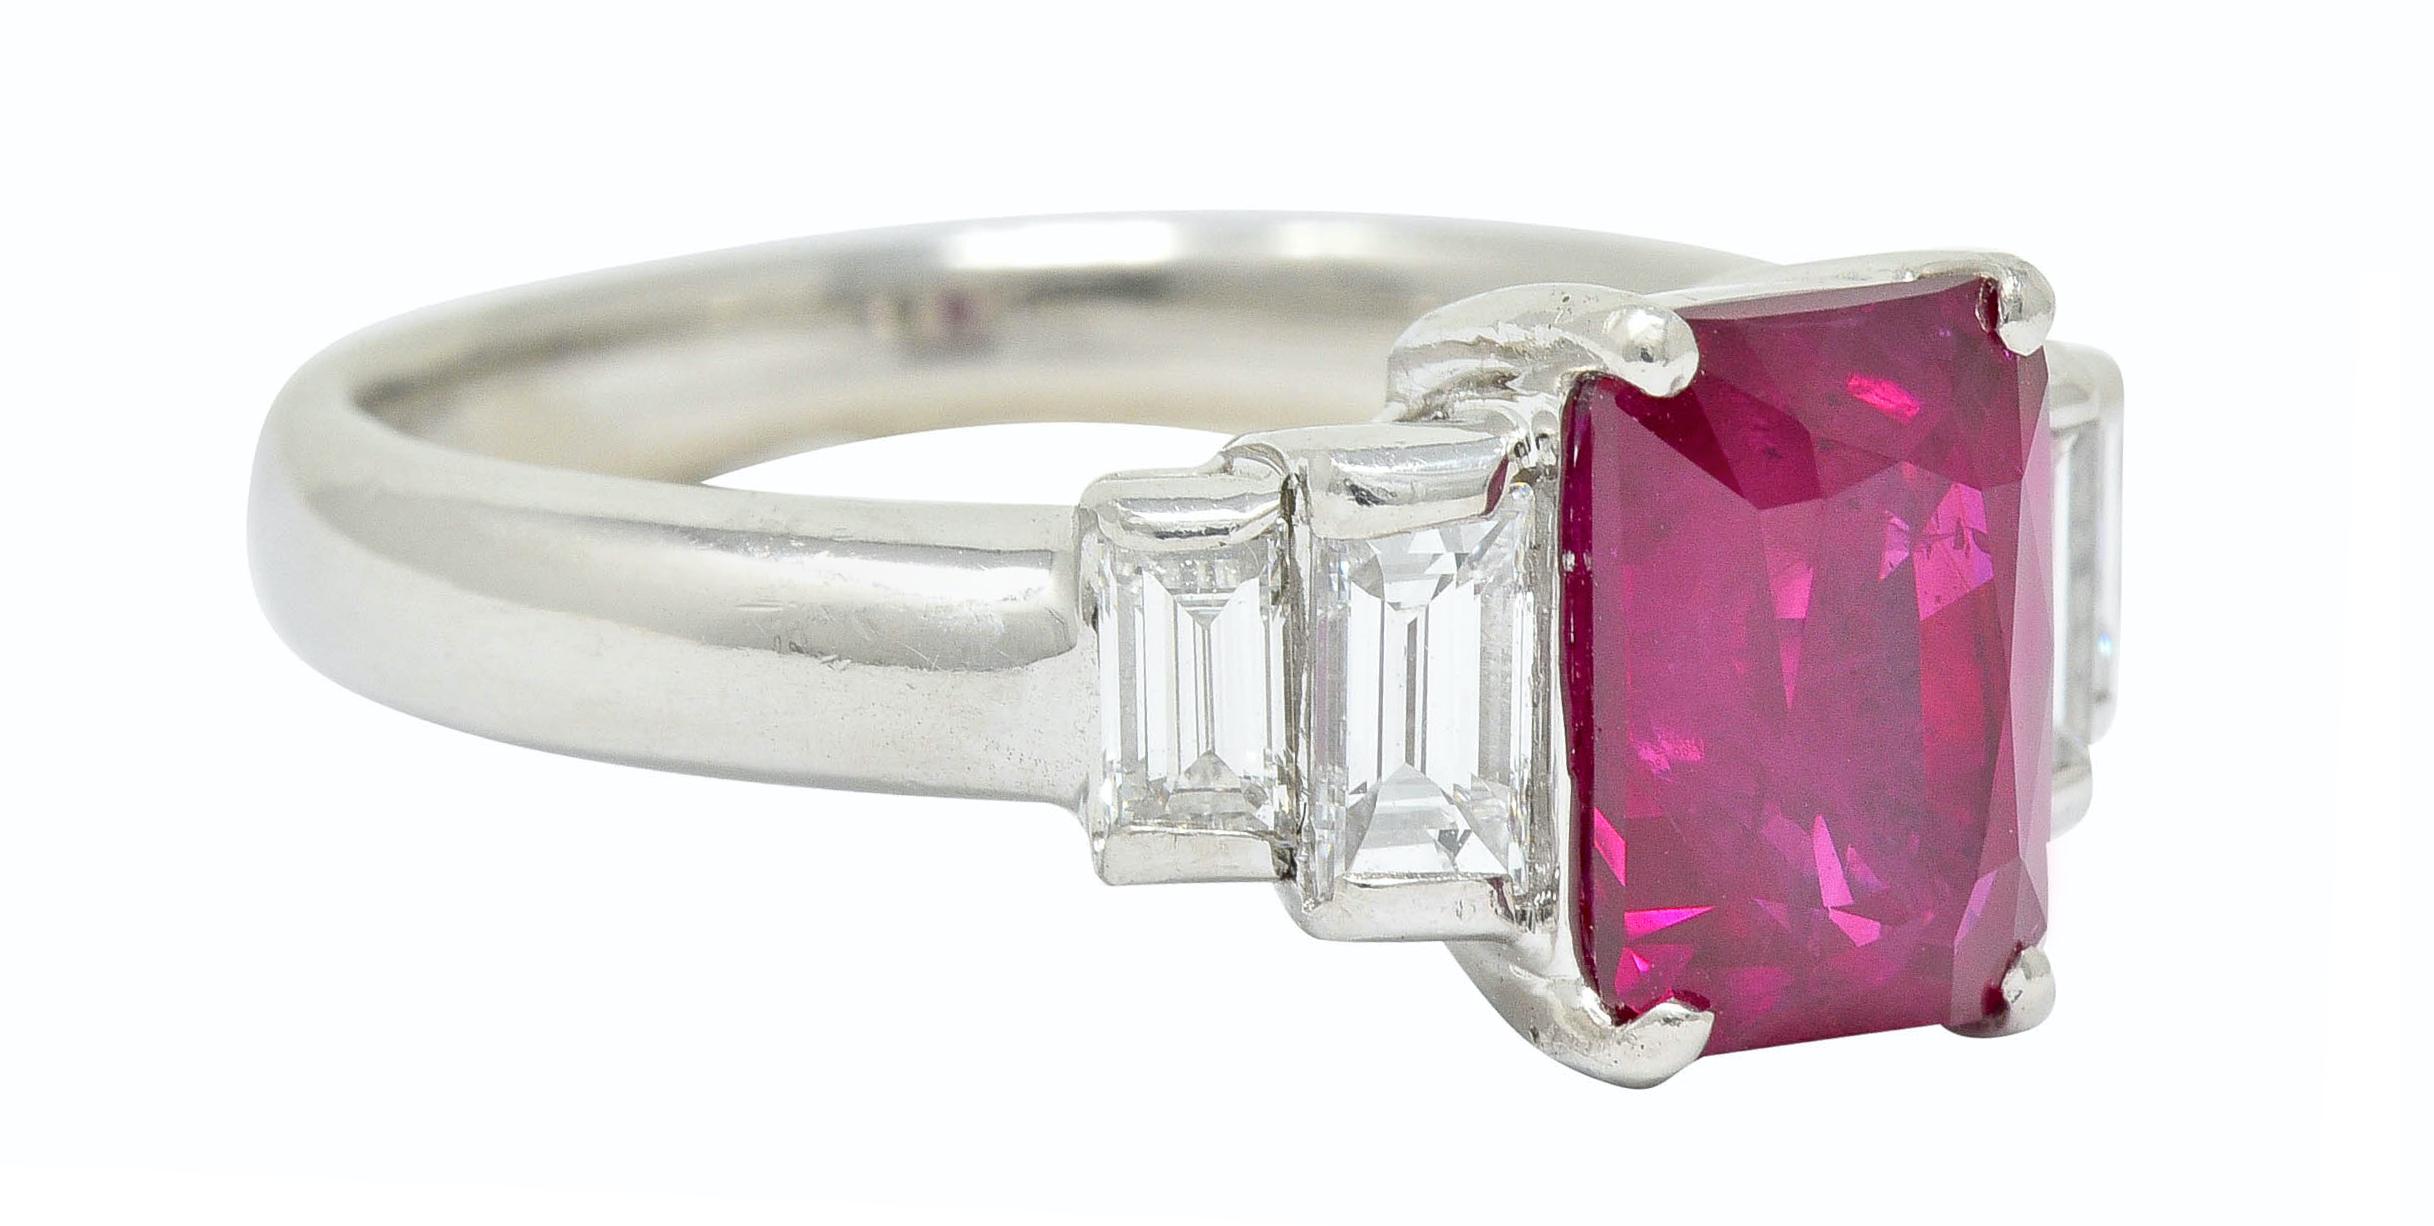 Centering a uniquely cut octagonal Burma ruby weighing 2.78 carats

Transparent with very slightly purplish to bright red color

Flanked by stepped shoulders bar set with baguette cut diamonds weighing in total 0.71 carat; G/H color with VS